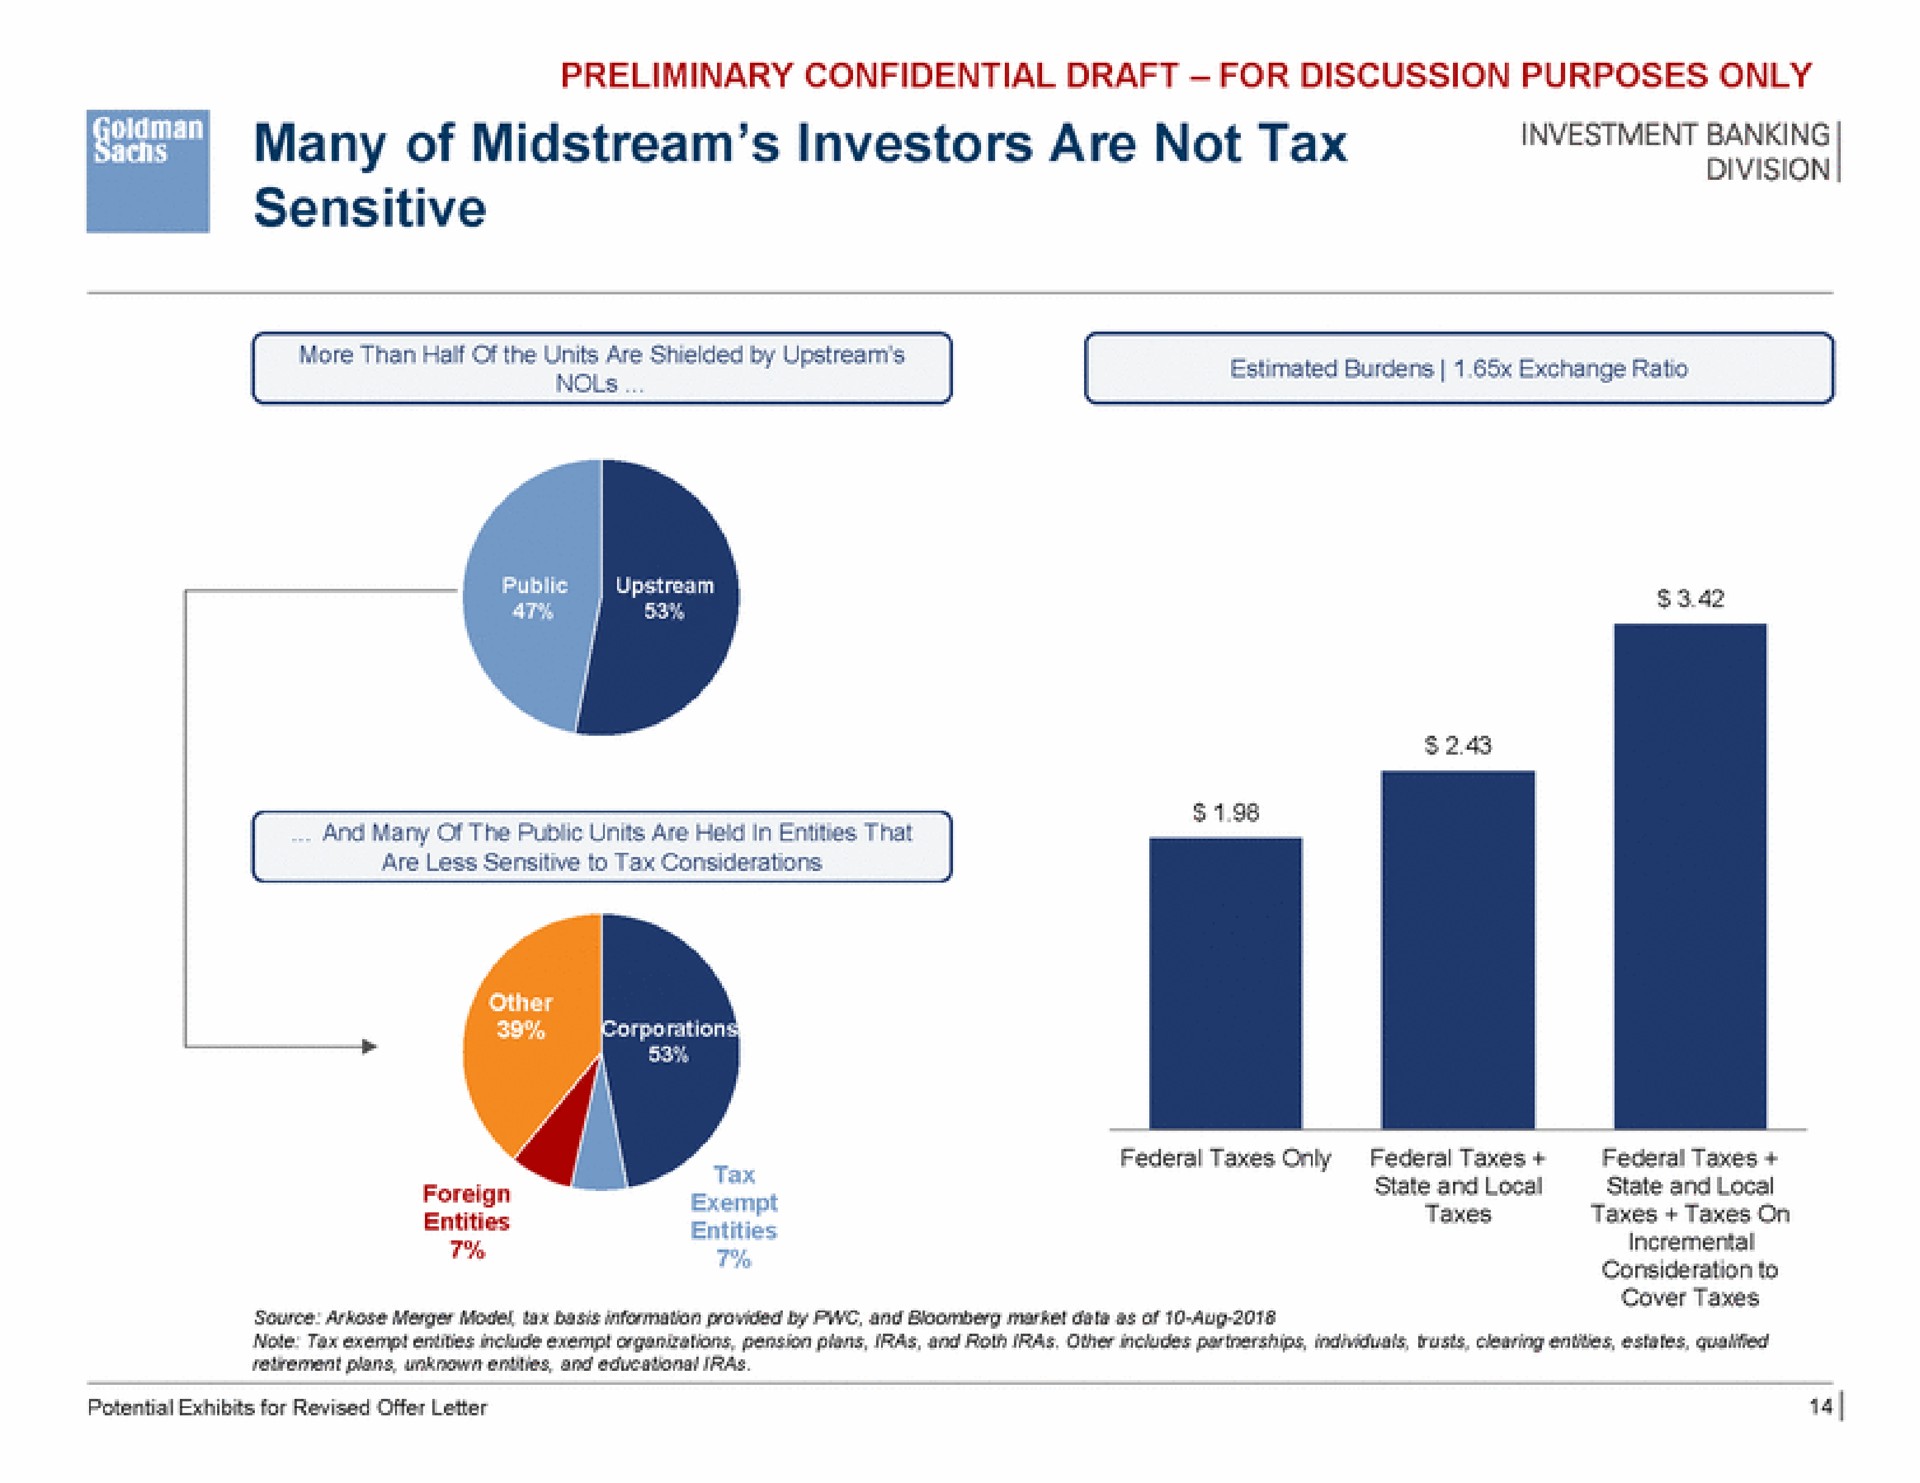 many of midstream investors are not tax sensitive alma mote than half of the units are shielded by upstream see oes | Goldman Sachs